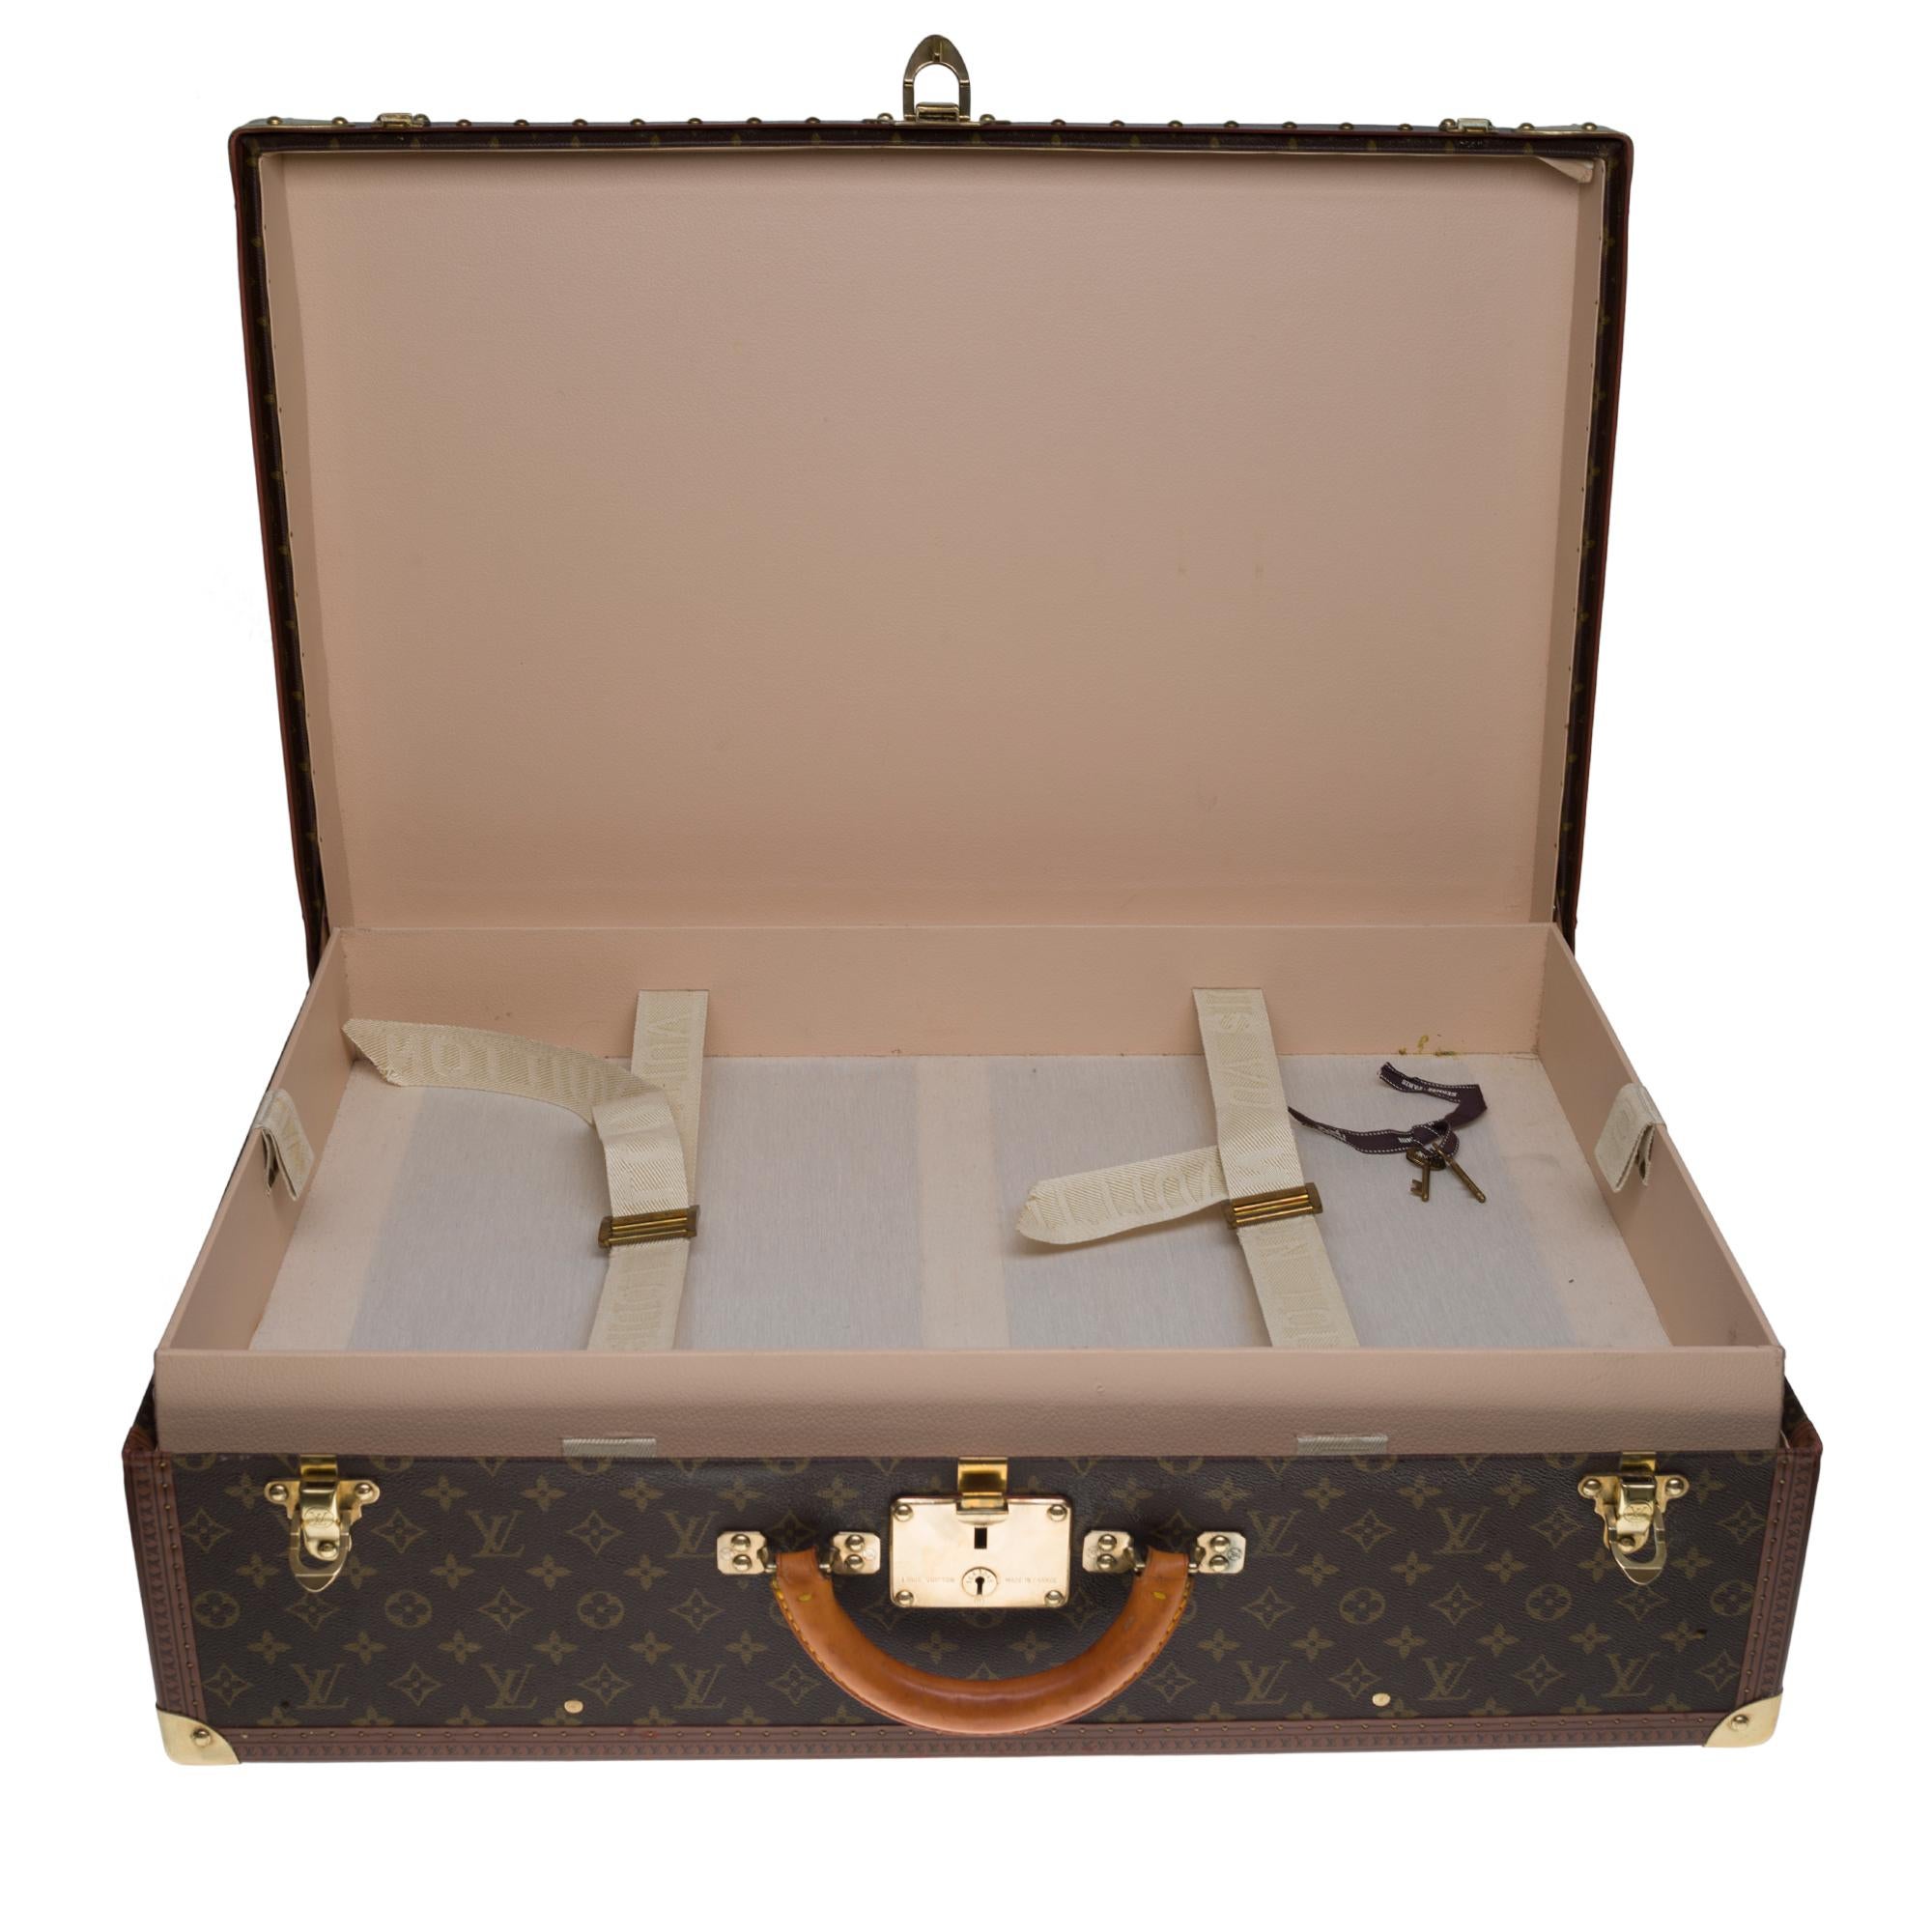 Beautiful decorative and collectible object:

Lovely Louis Vuitton Alzer suitcase in monogram canvas and brown lozine, brass trim, natural leather handle allowing a handheld.

Three brass clasps.
1 tray.
Lining in beige canvas, two straps to hold